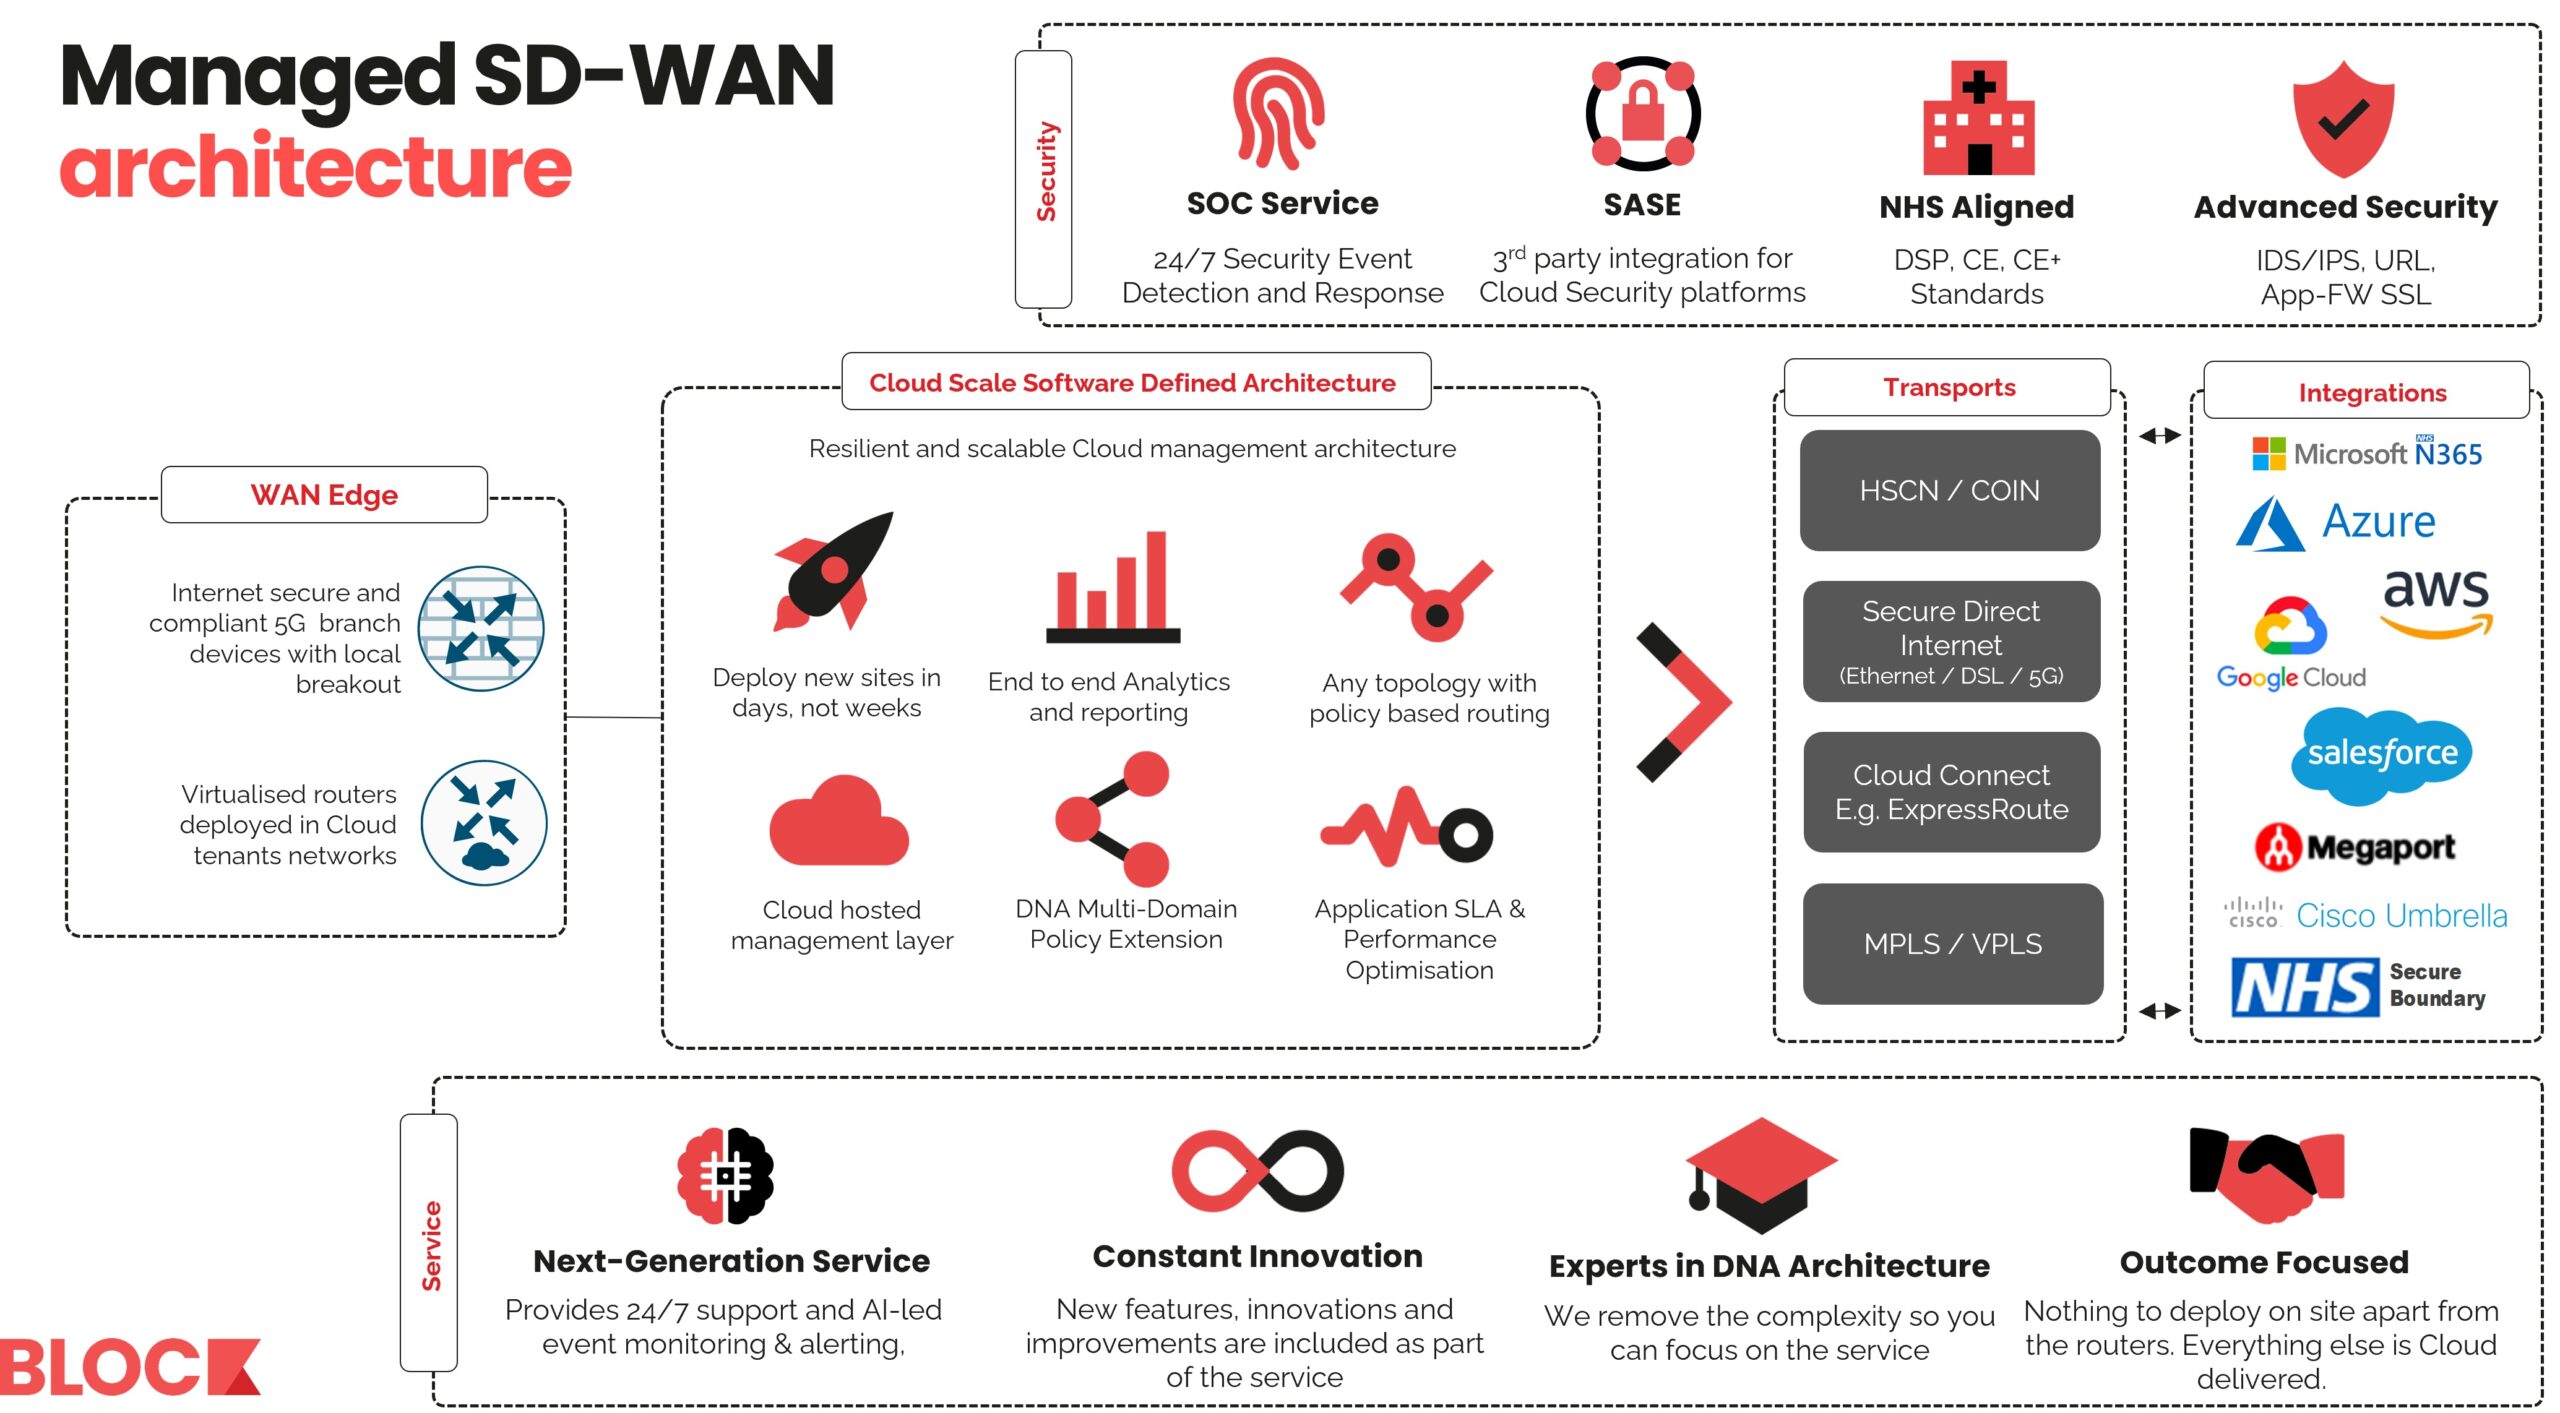 Managed SD-WAN architecture